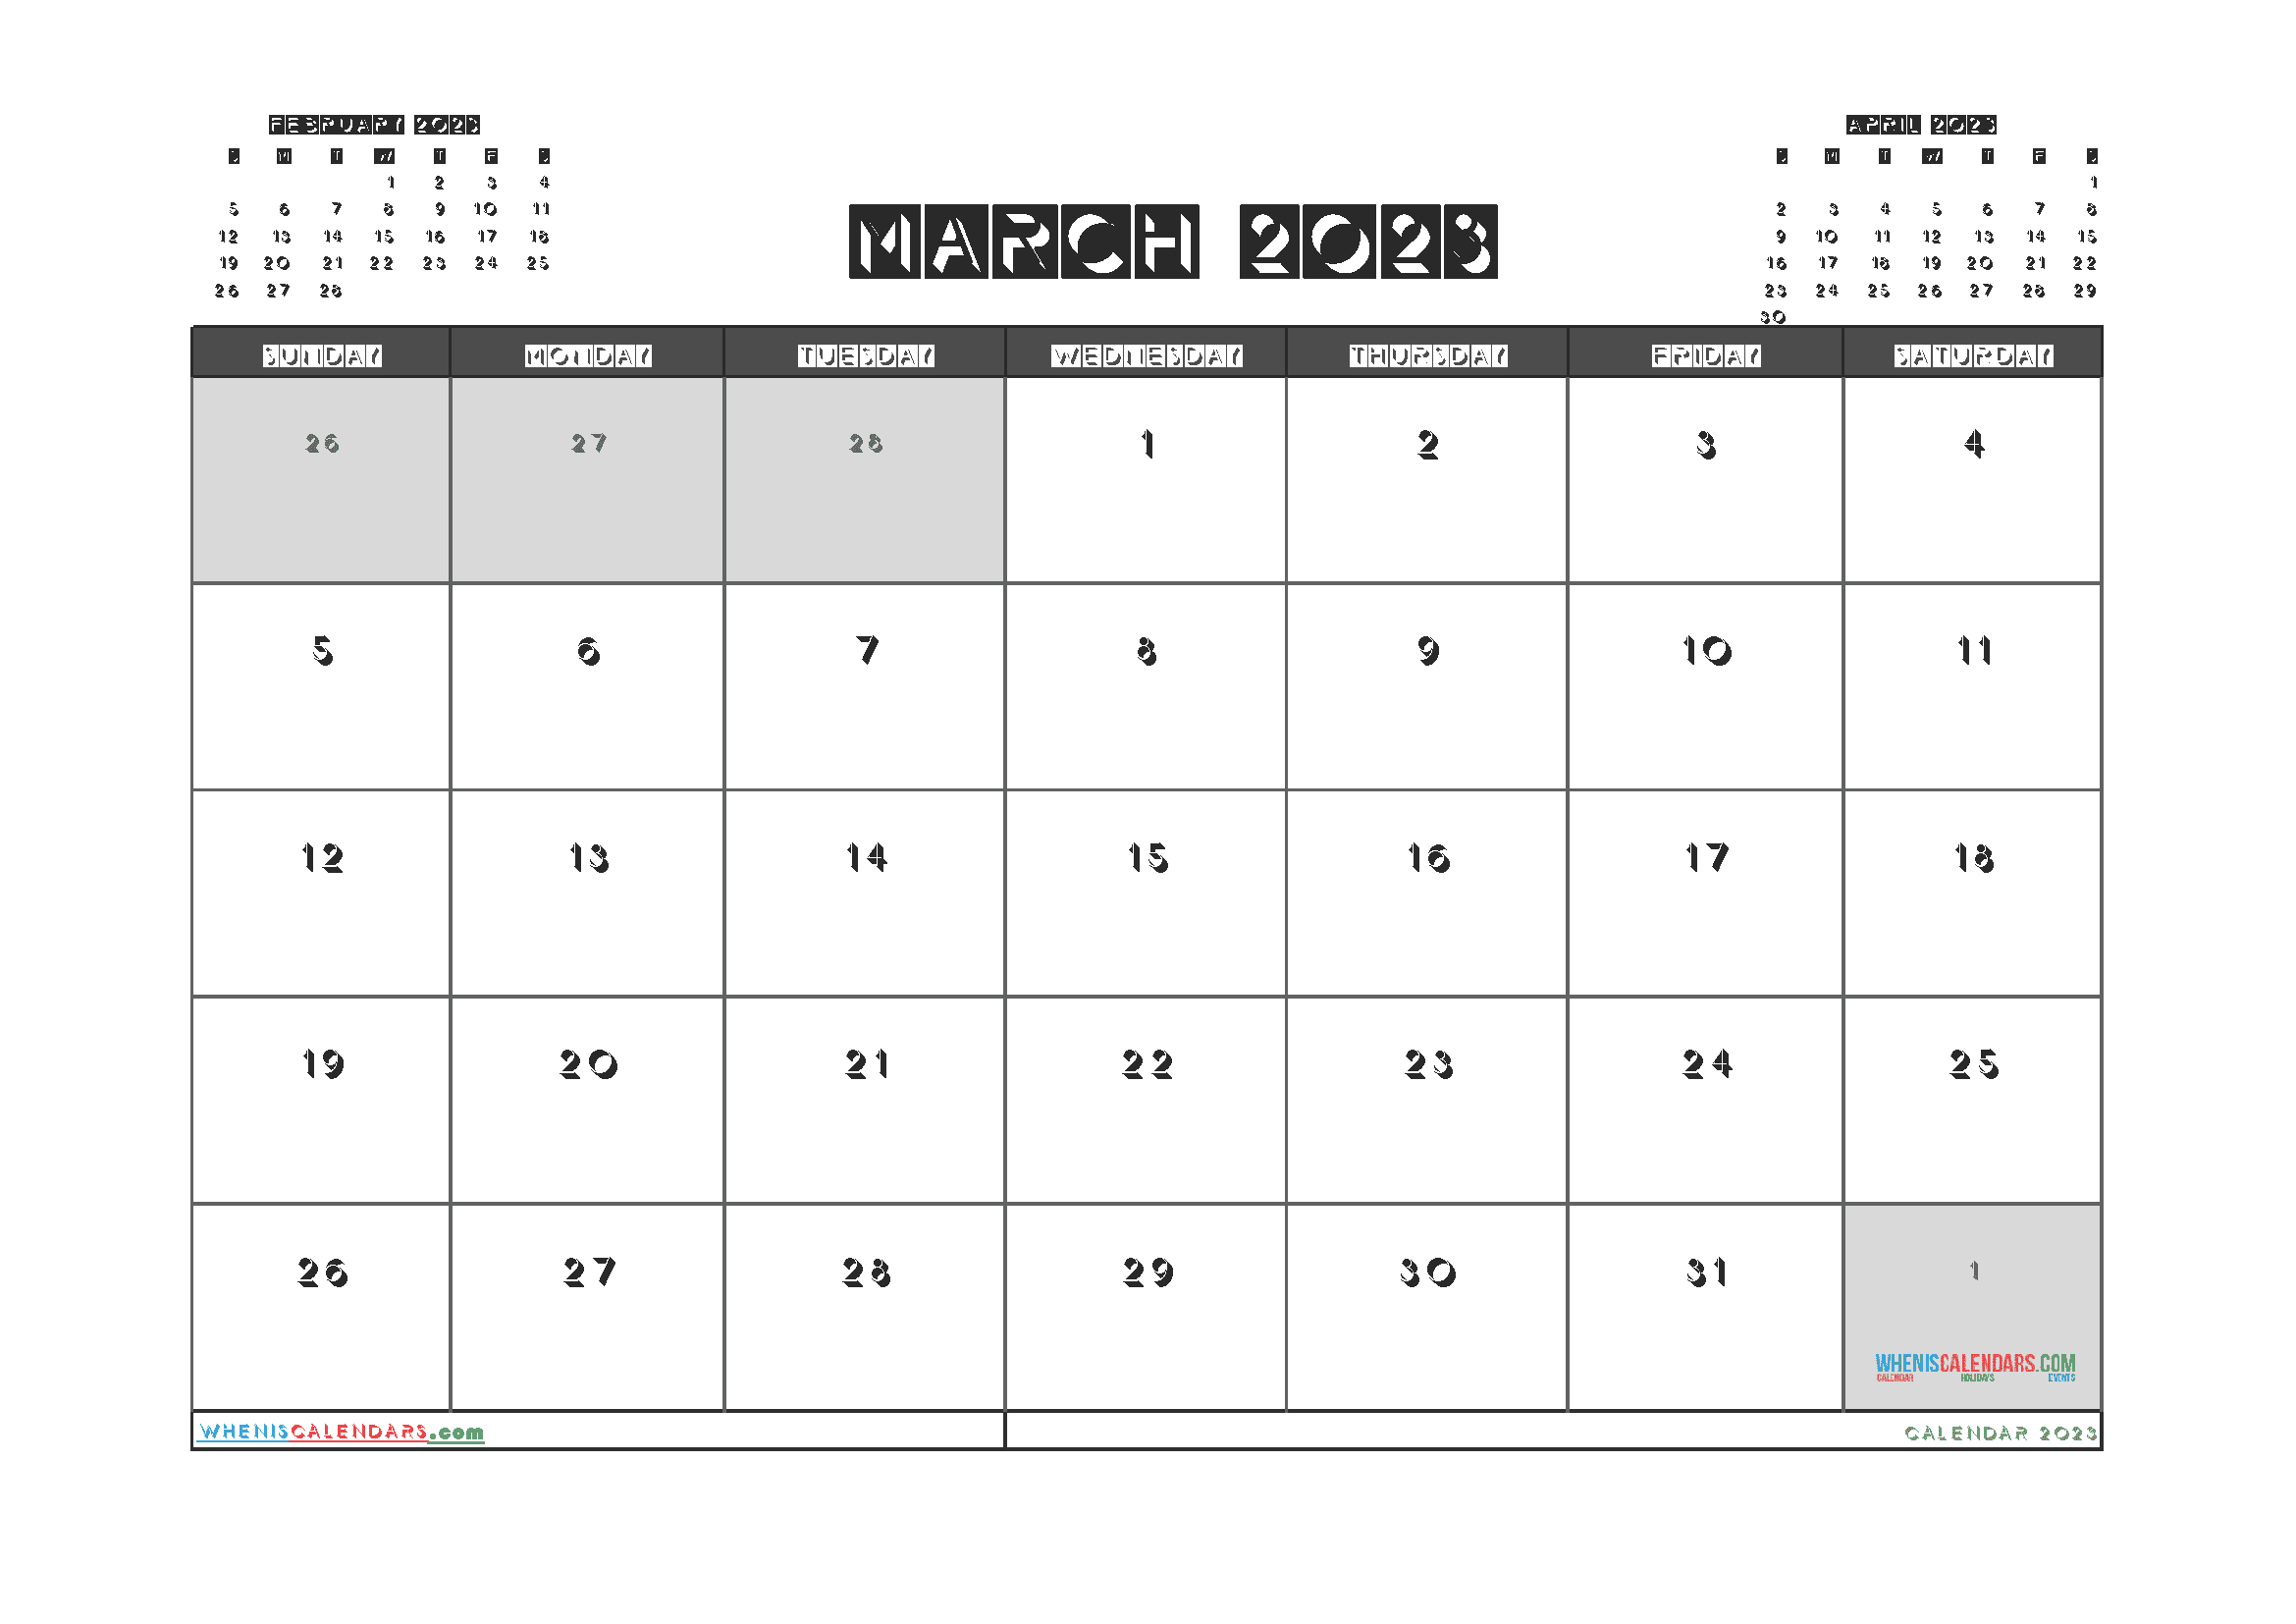 Free March 2023 Calendar with Holidays Printable PDF in Landscape